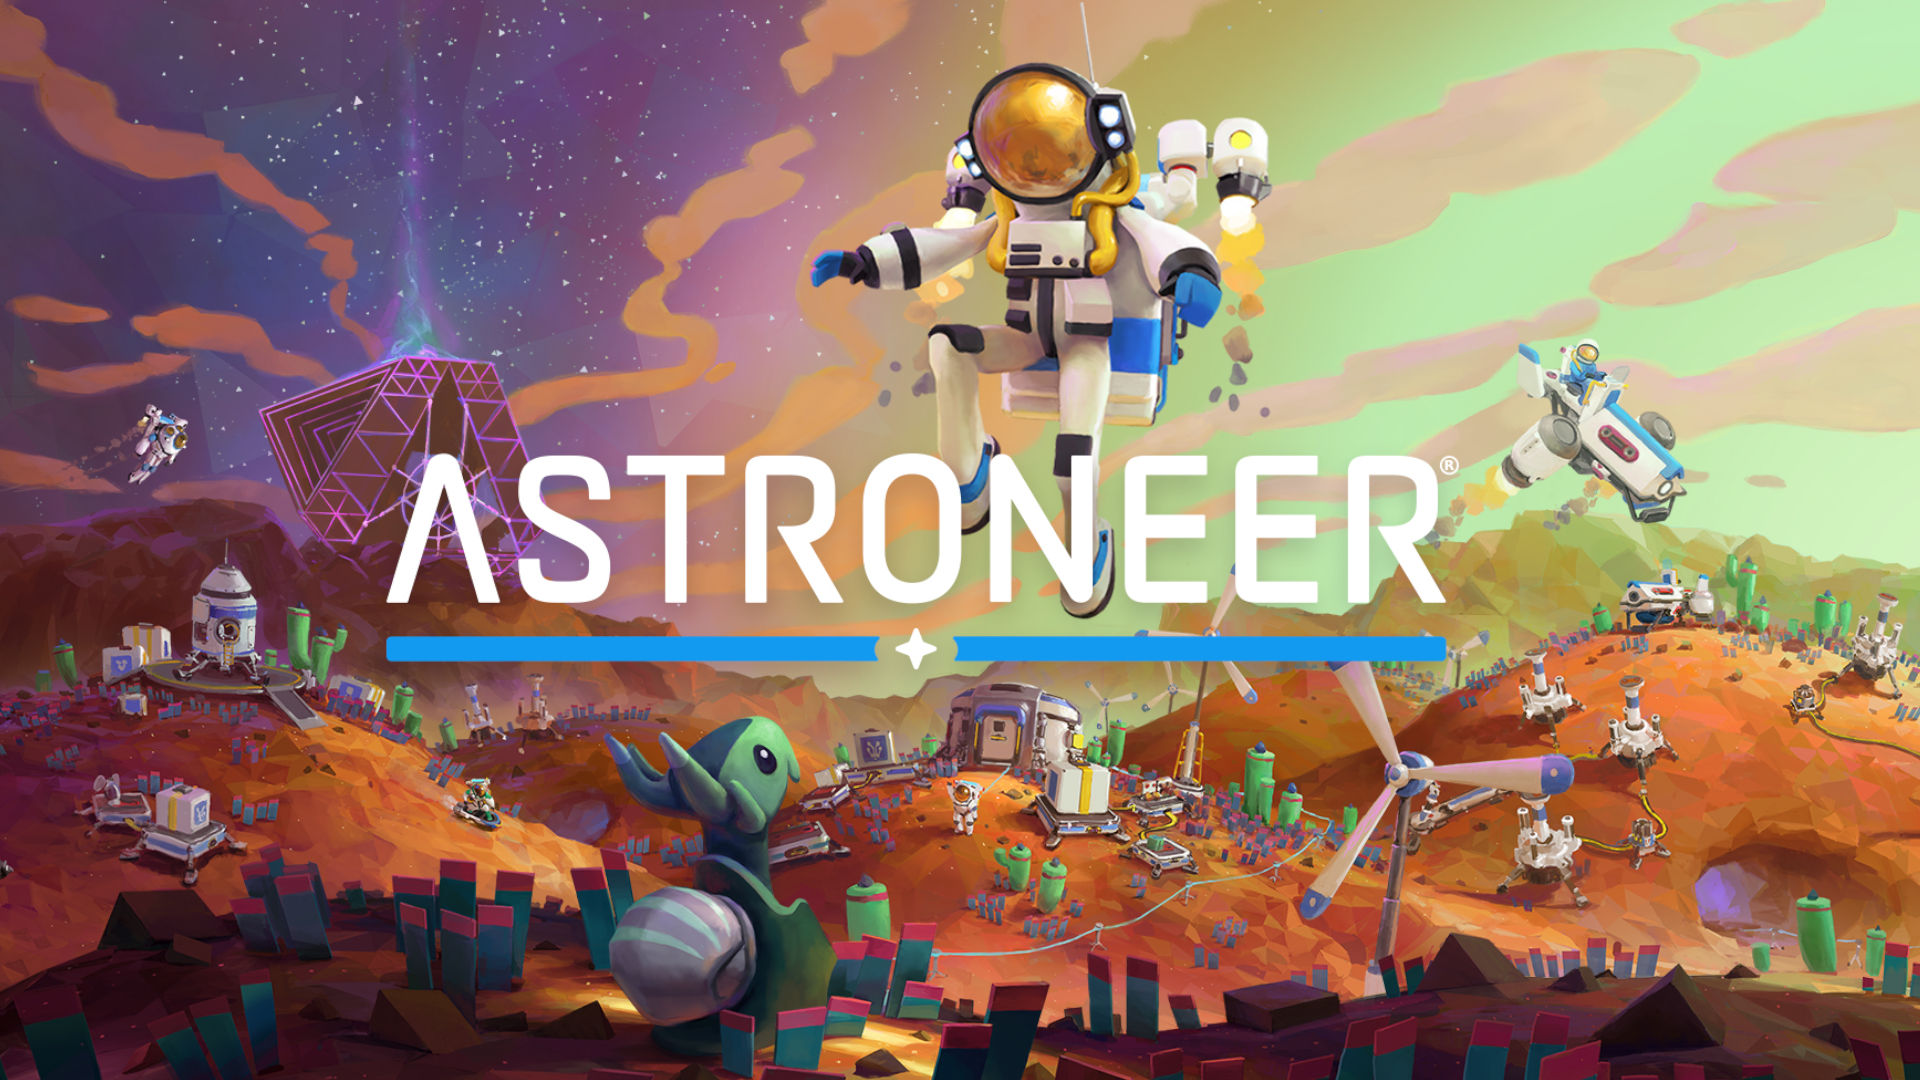 Best space games: Astroneer. Image shows an astronaut flying above a landscape filled with strange creatures, as well as the logo of the game.